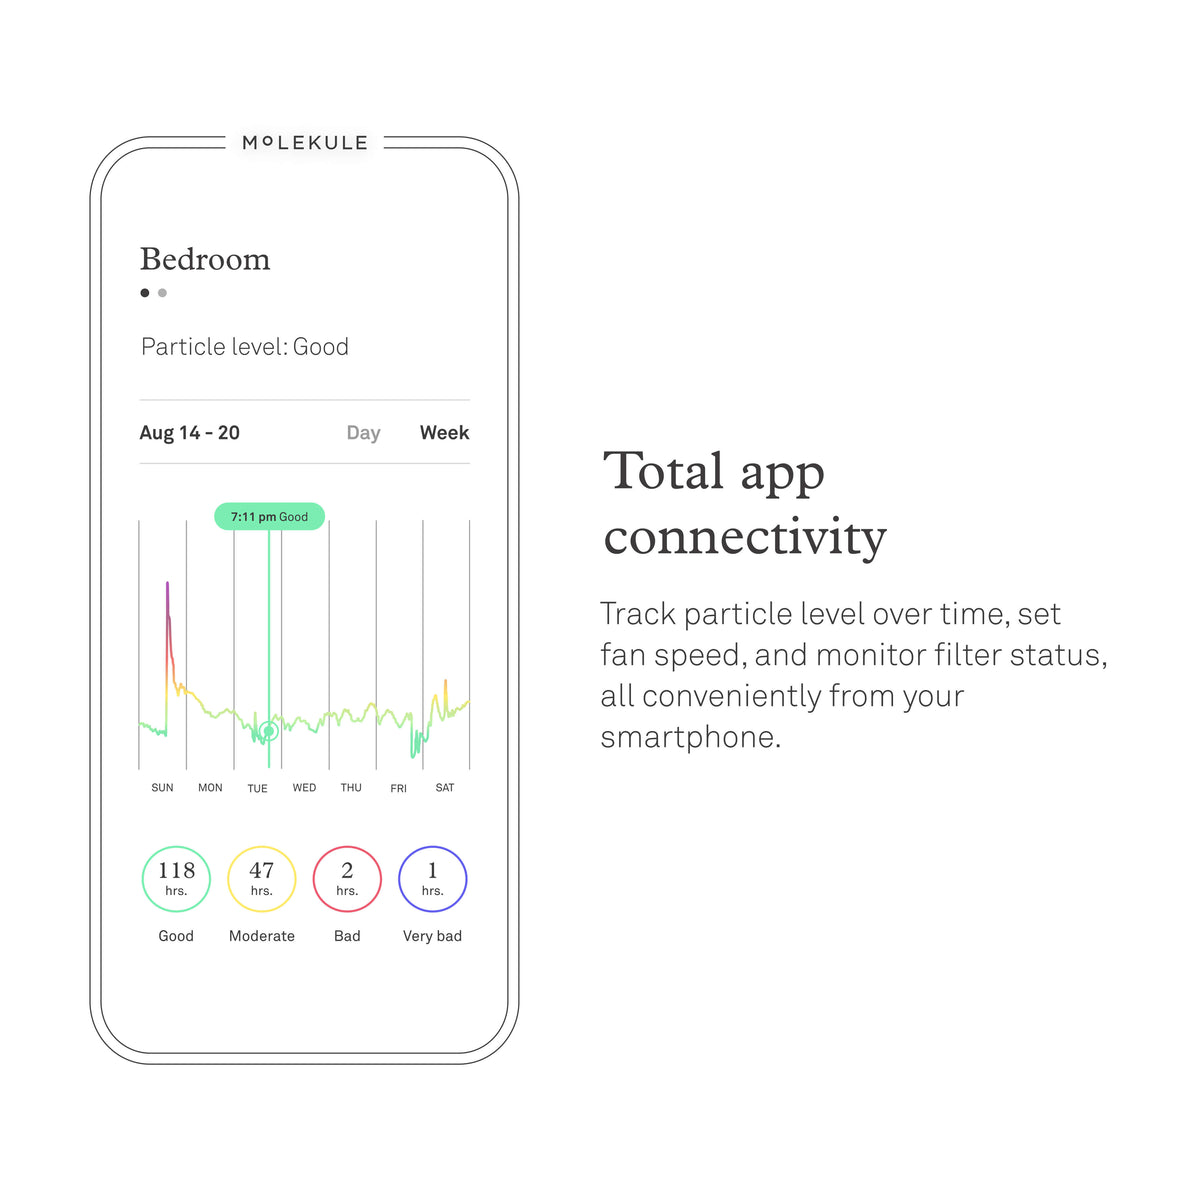 Molekule mobile app. Total app connectivity. Track particle level over time, set fan speed, and monitor filter status, all conveniently from your smartphone.